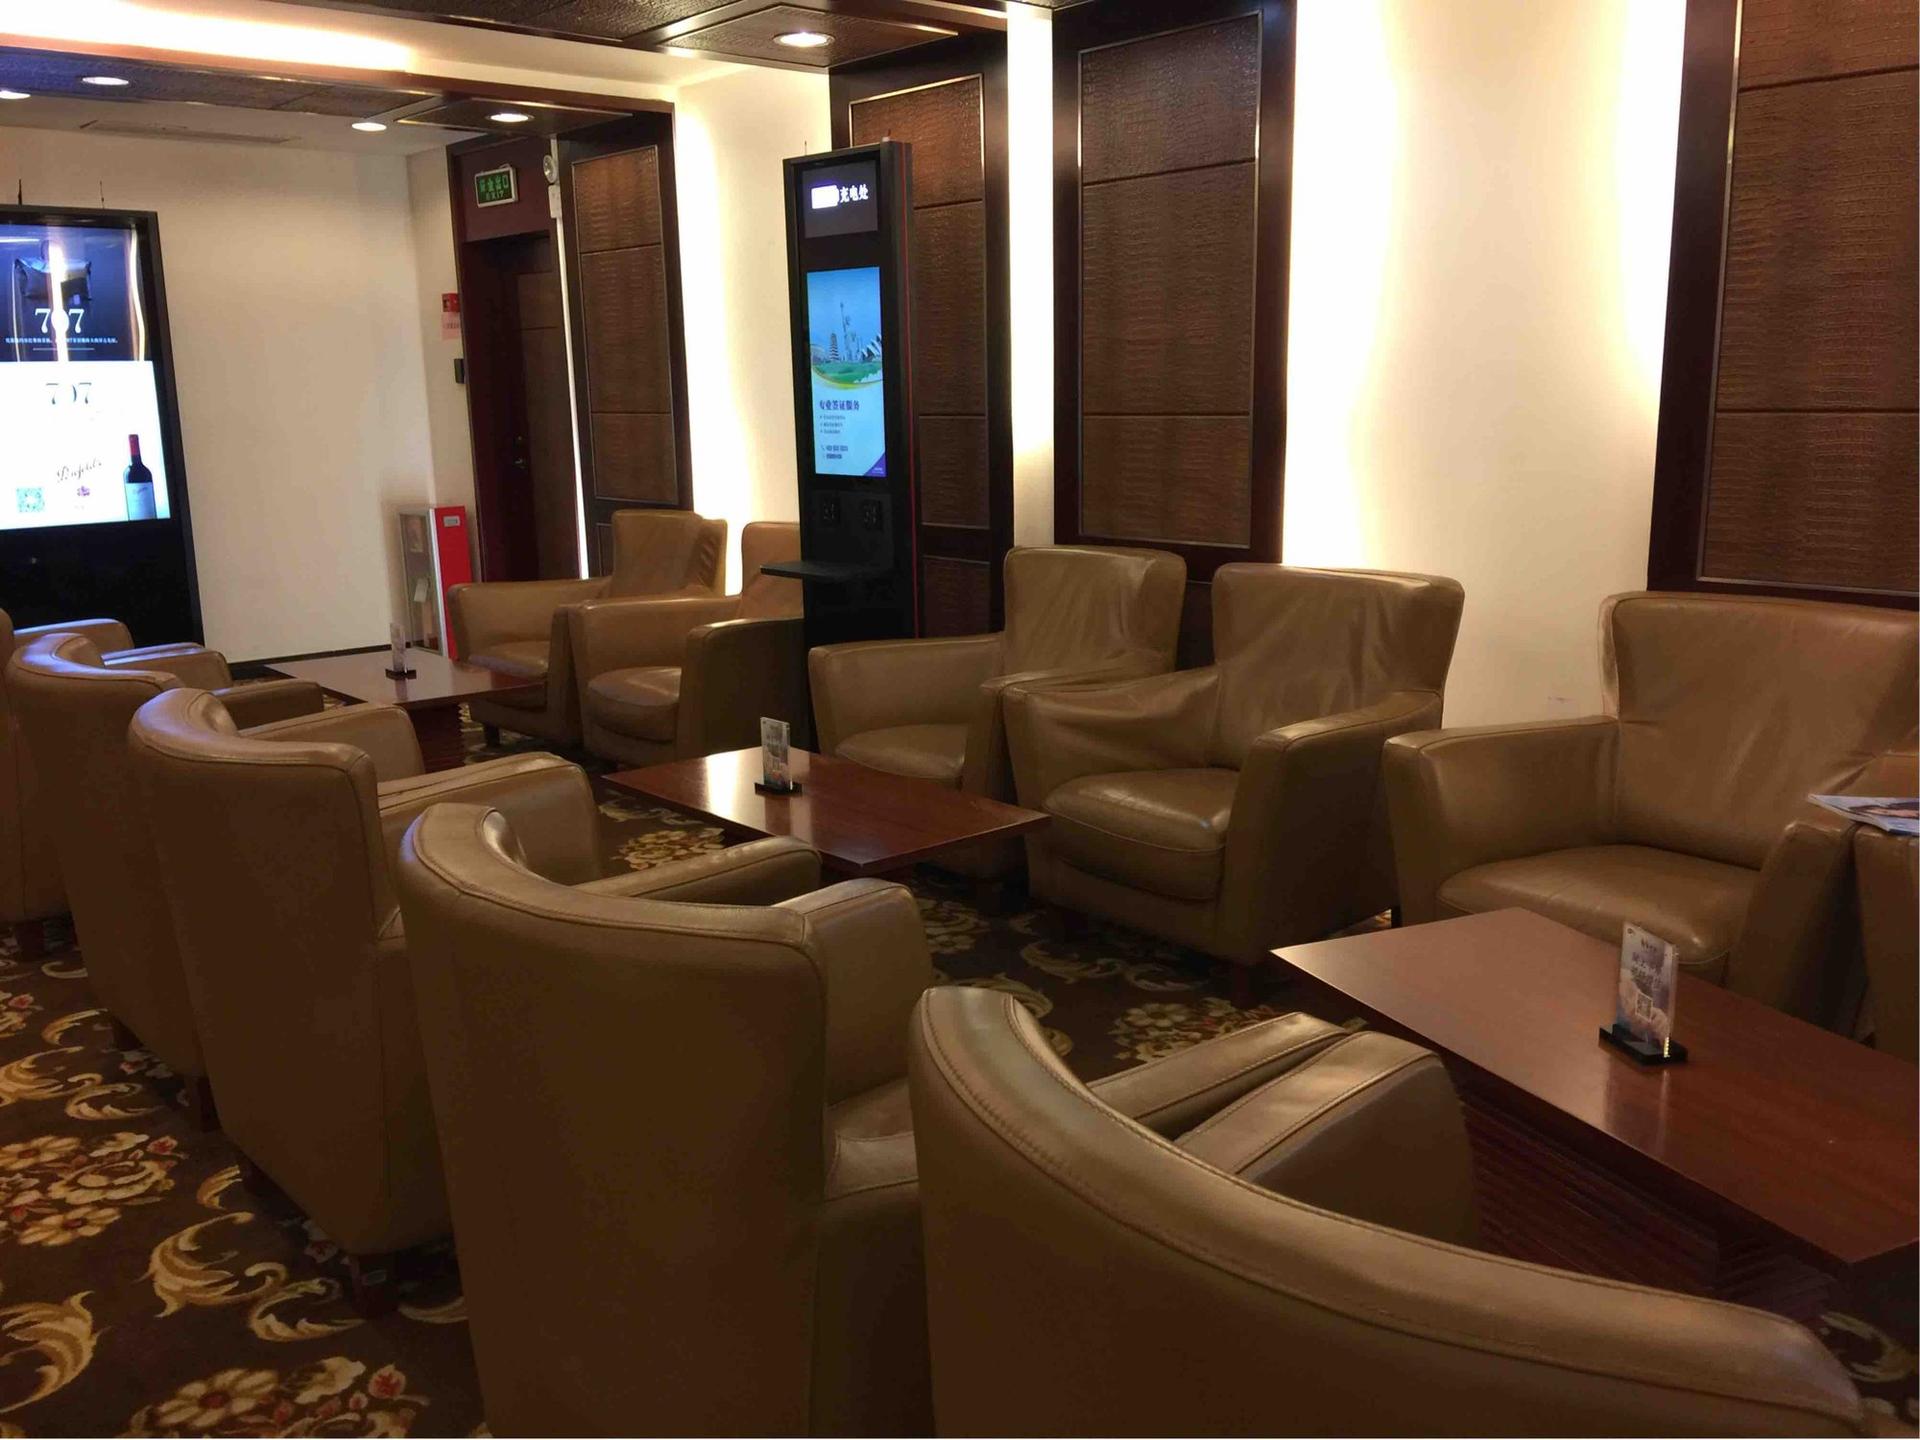 Baiyun Airport First Class Lounge (Closed For Renovation) image 1 of 11